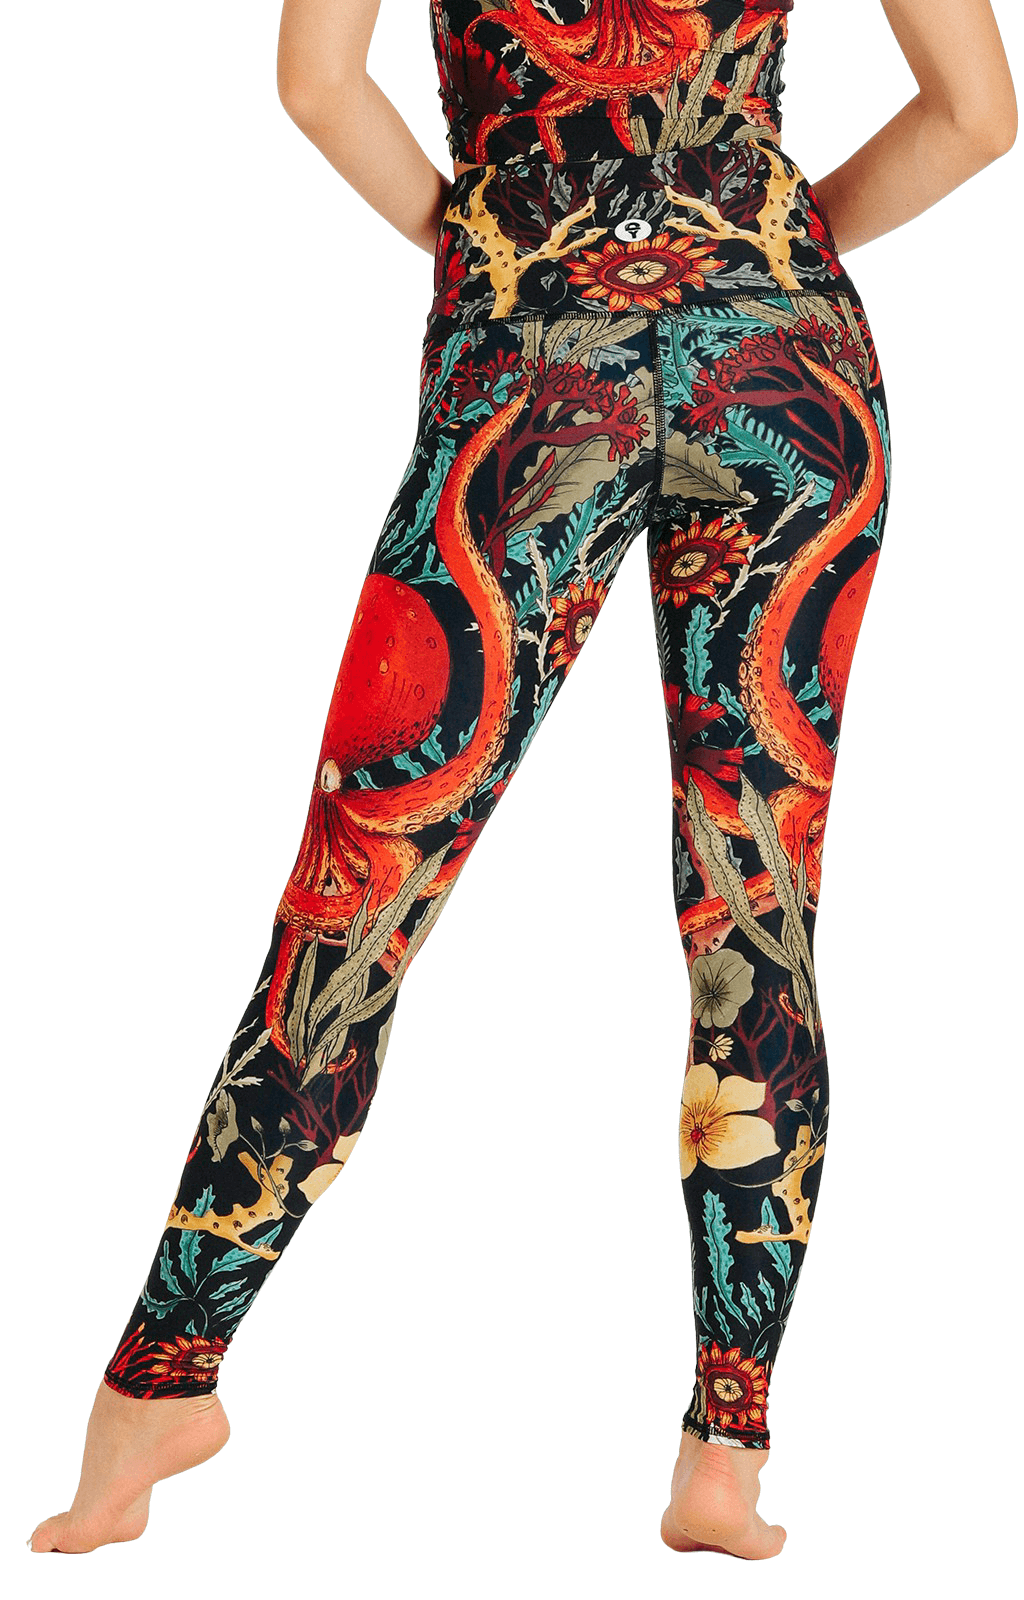 Mipaws Women's High Waisted Floral Coral Yoga Leggings Size M